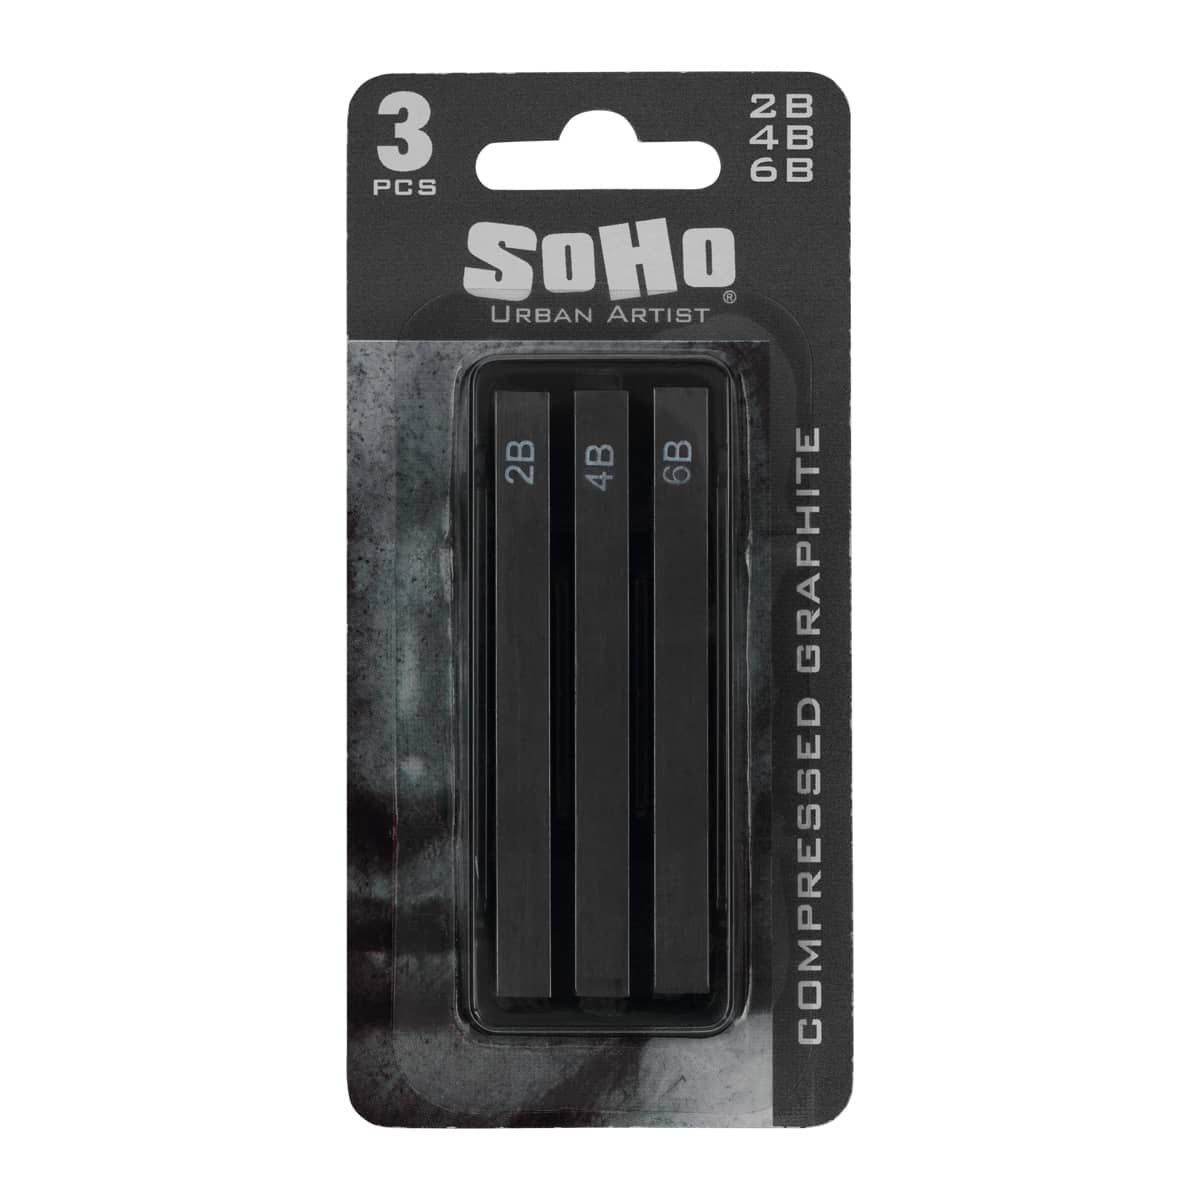 SoHo Compressed Graphite Stick Assorted 2B, 4B, and 6B Pack of 3